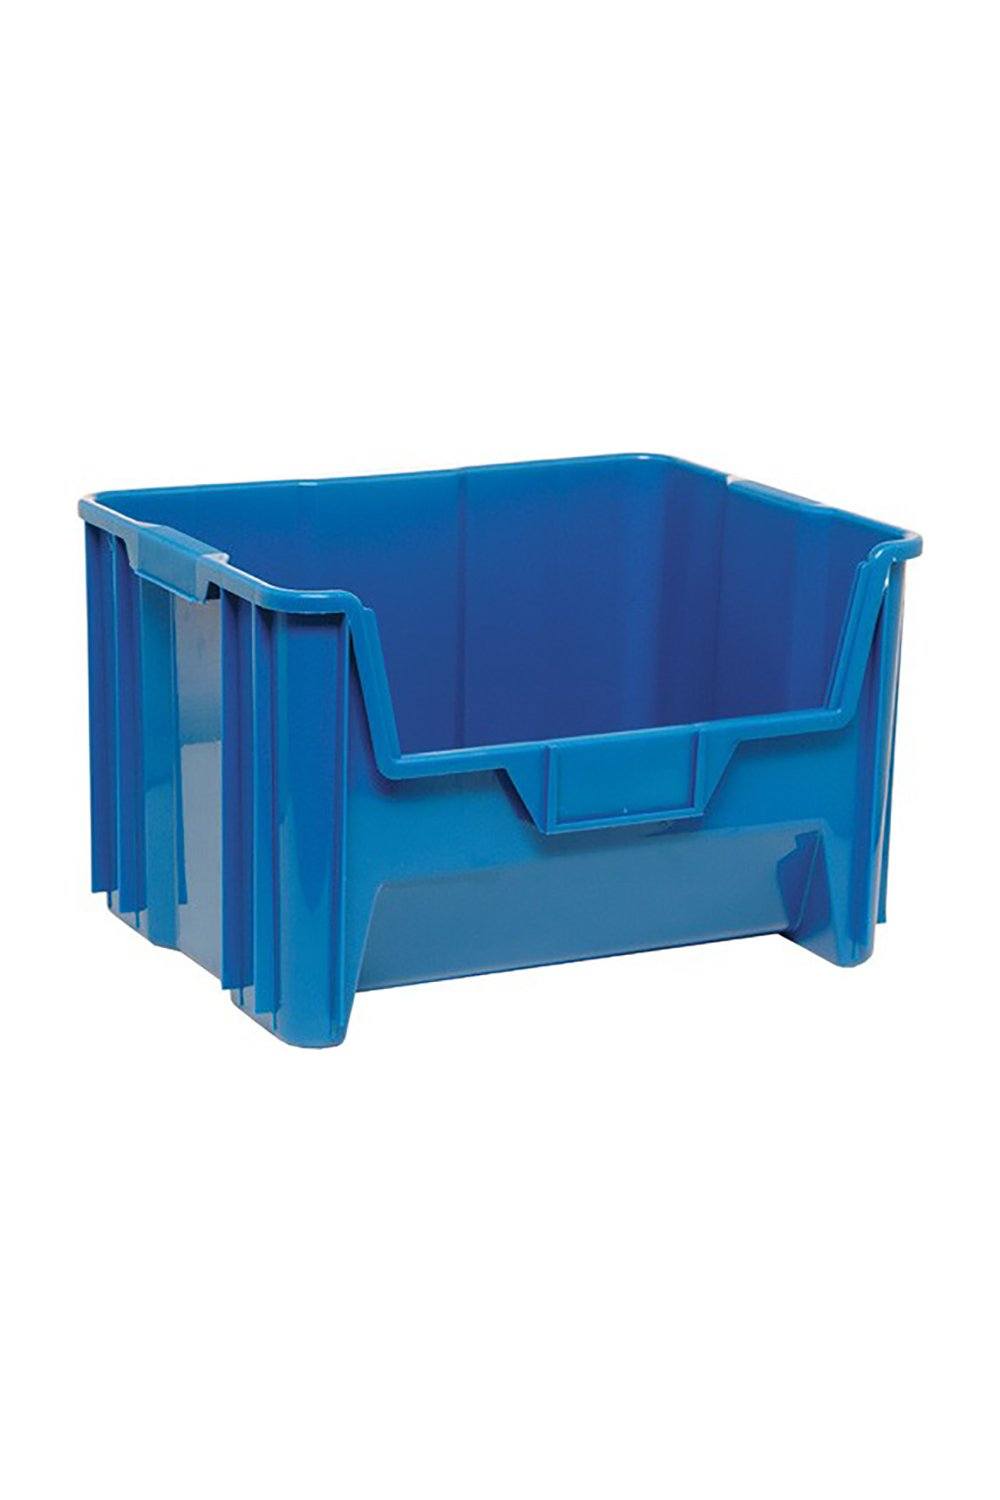 Giant Stack Container Bins & Containers Acart 15-1/4"L x 19-7/8"W x 12-7/16"H Blue 